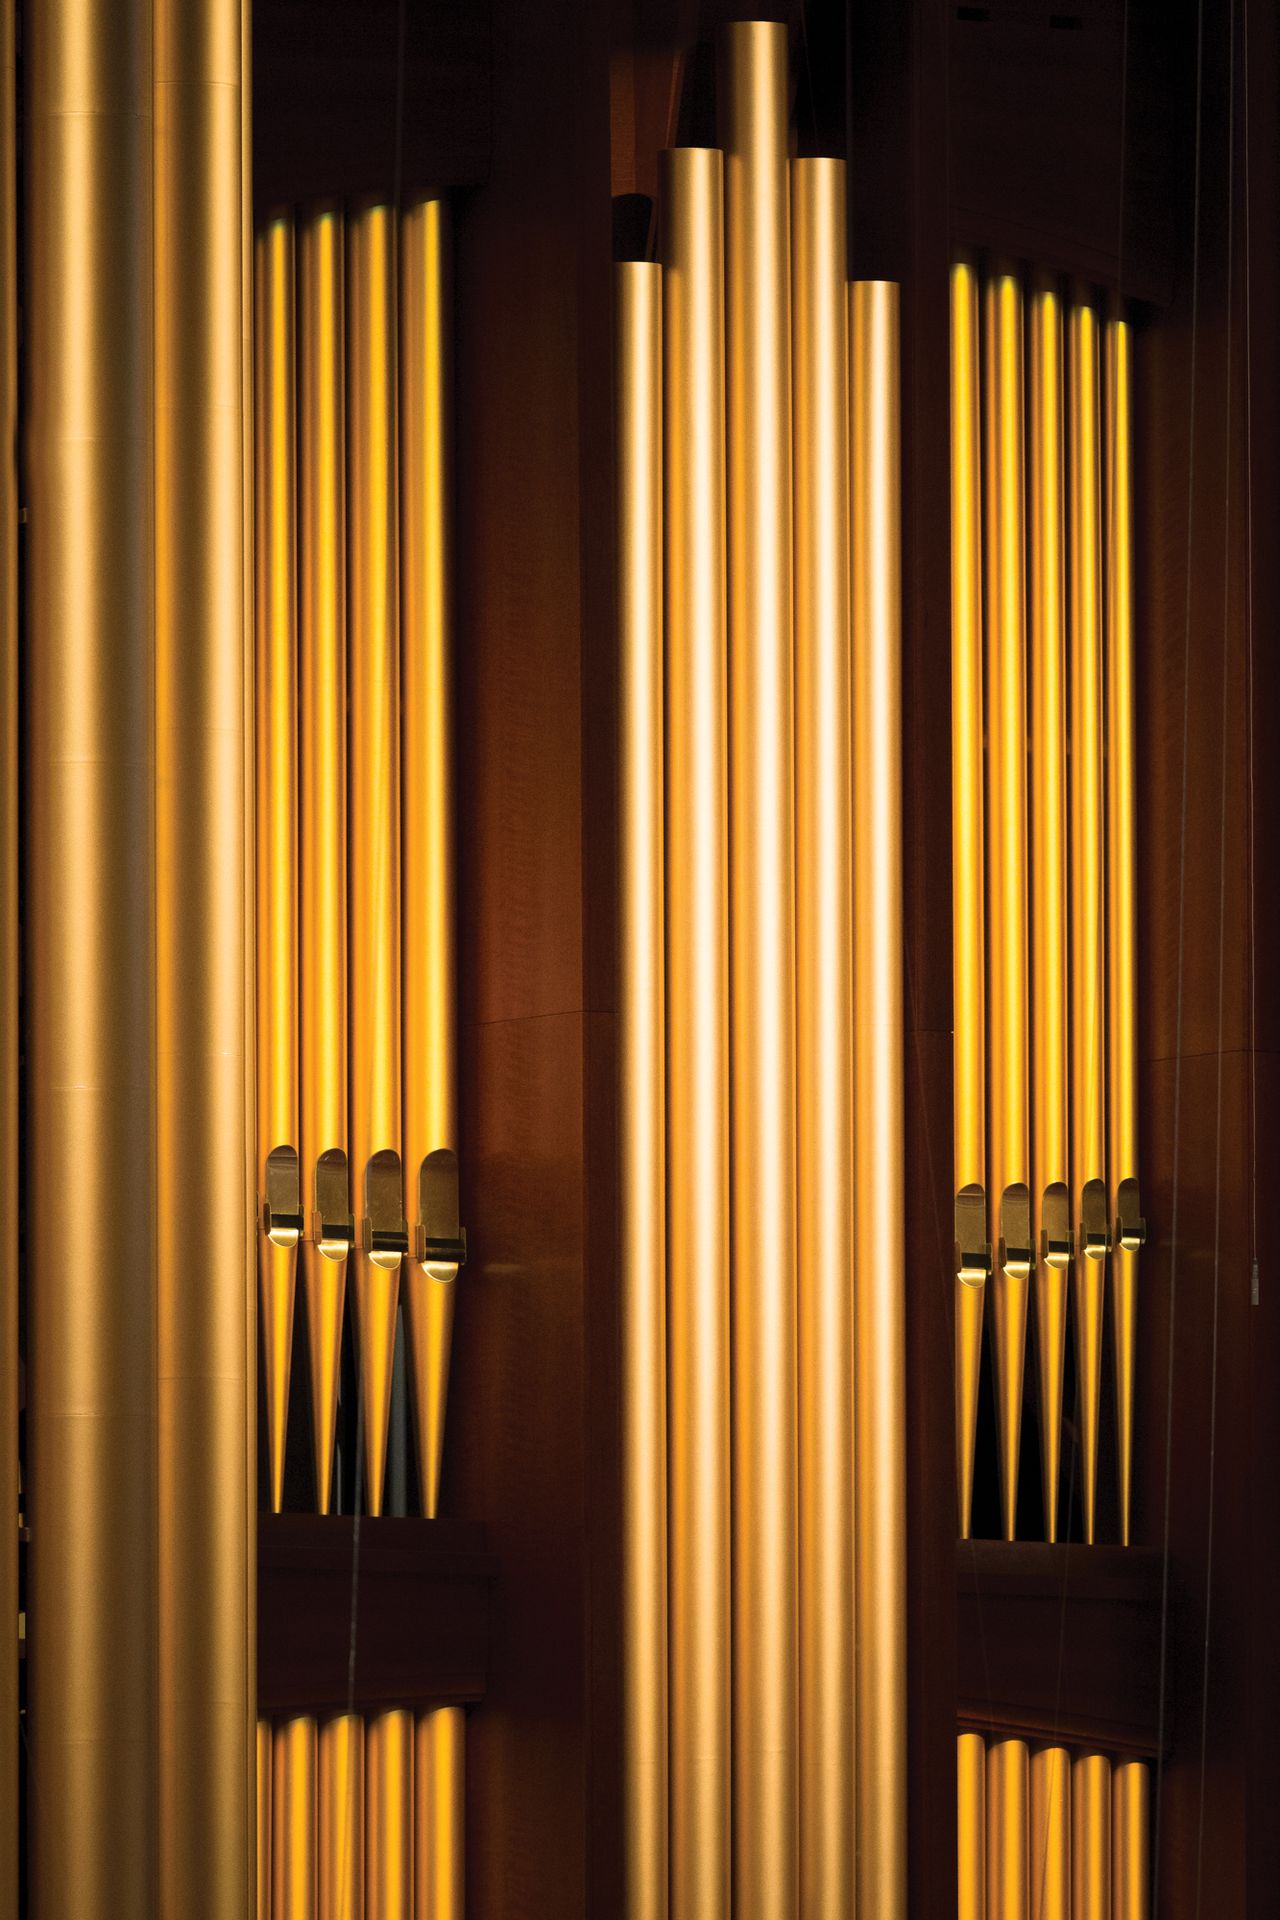 An image of pipes on an organ.